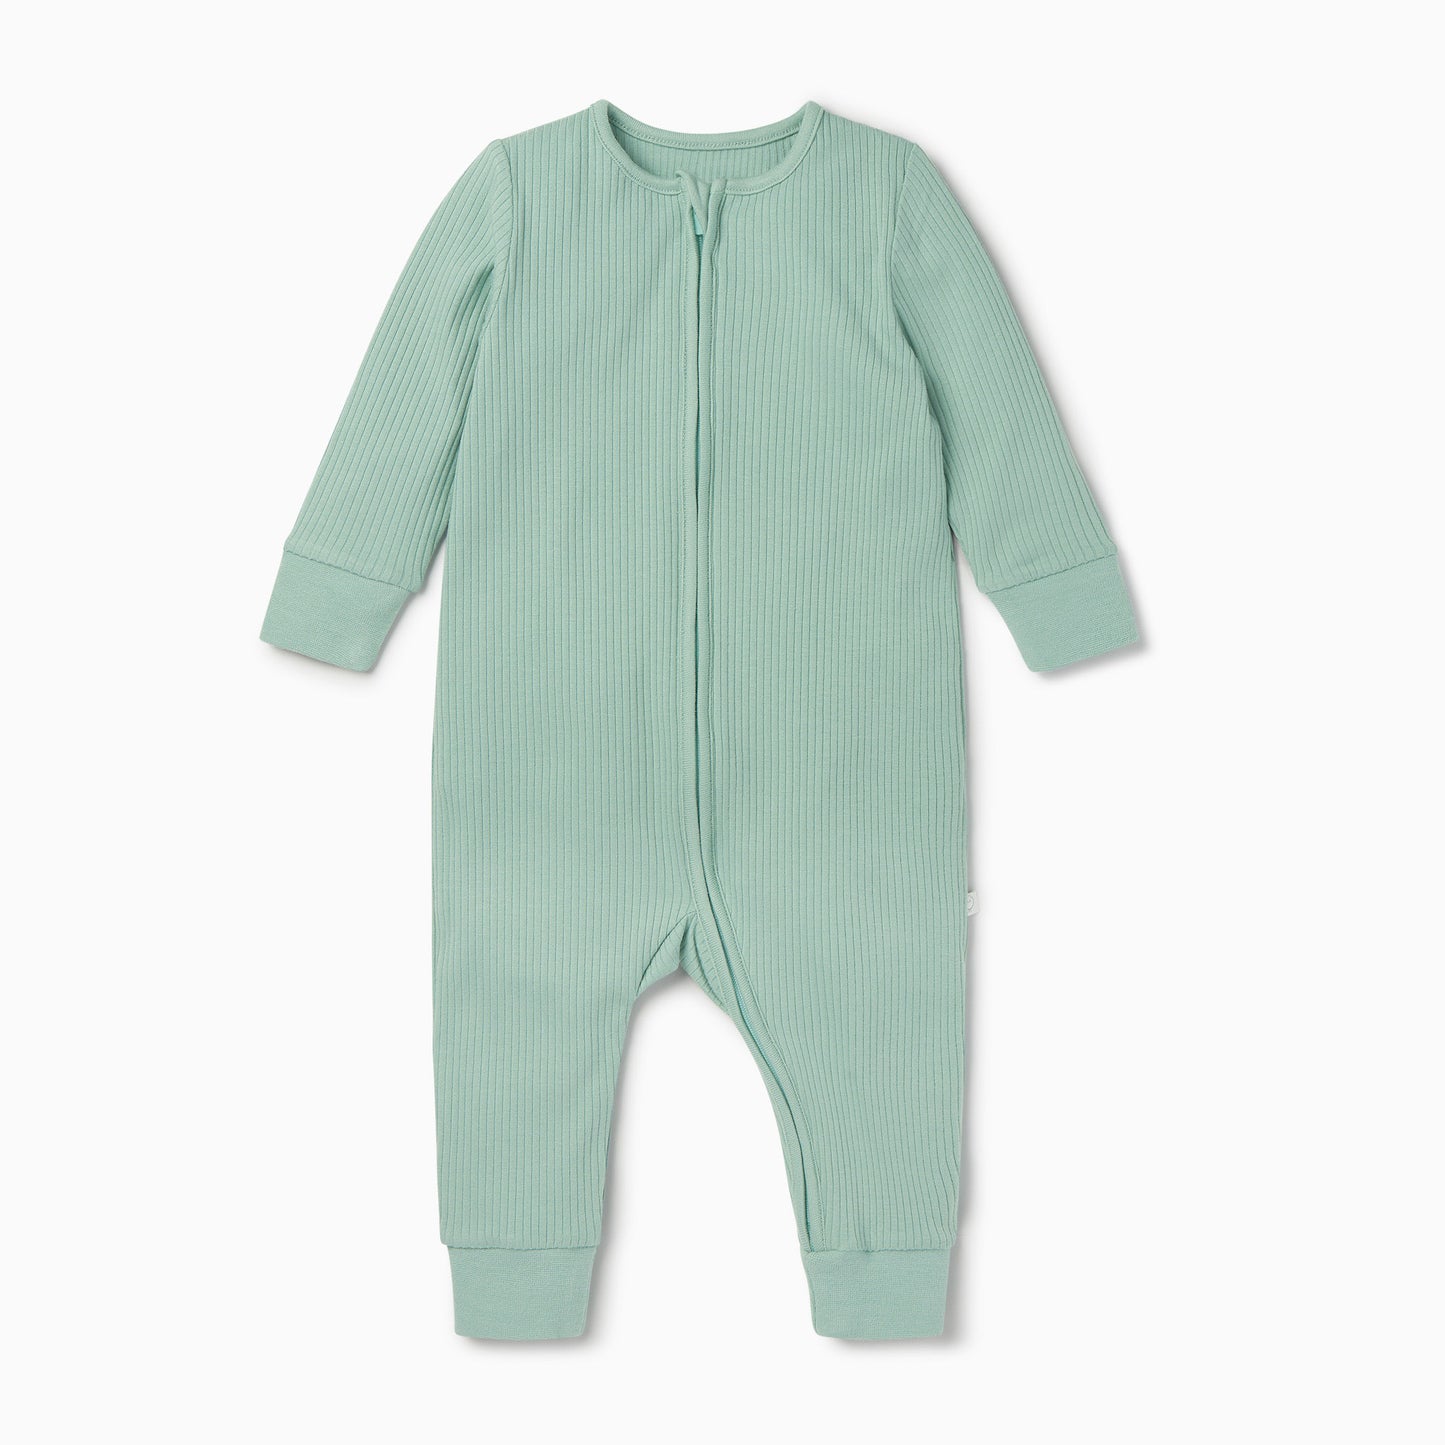 Mint ribbed zip up sleepsuit with no feet